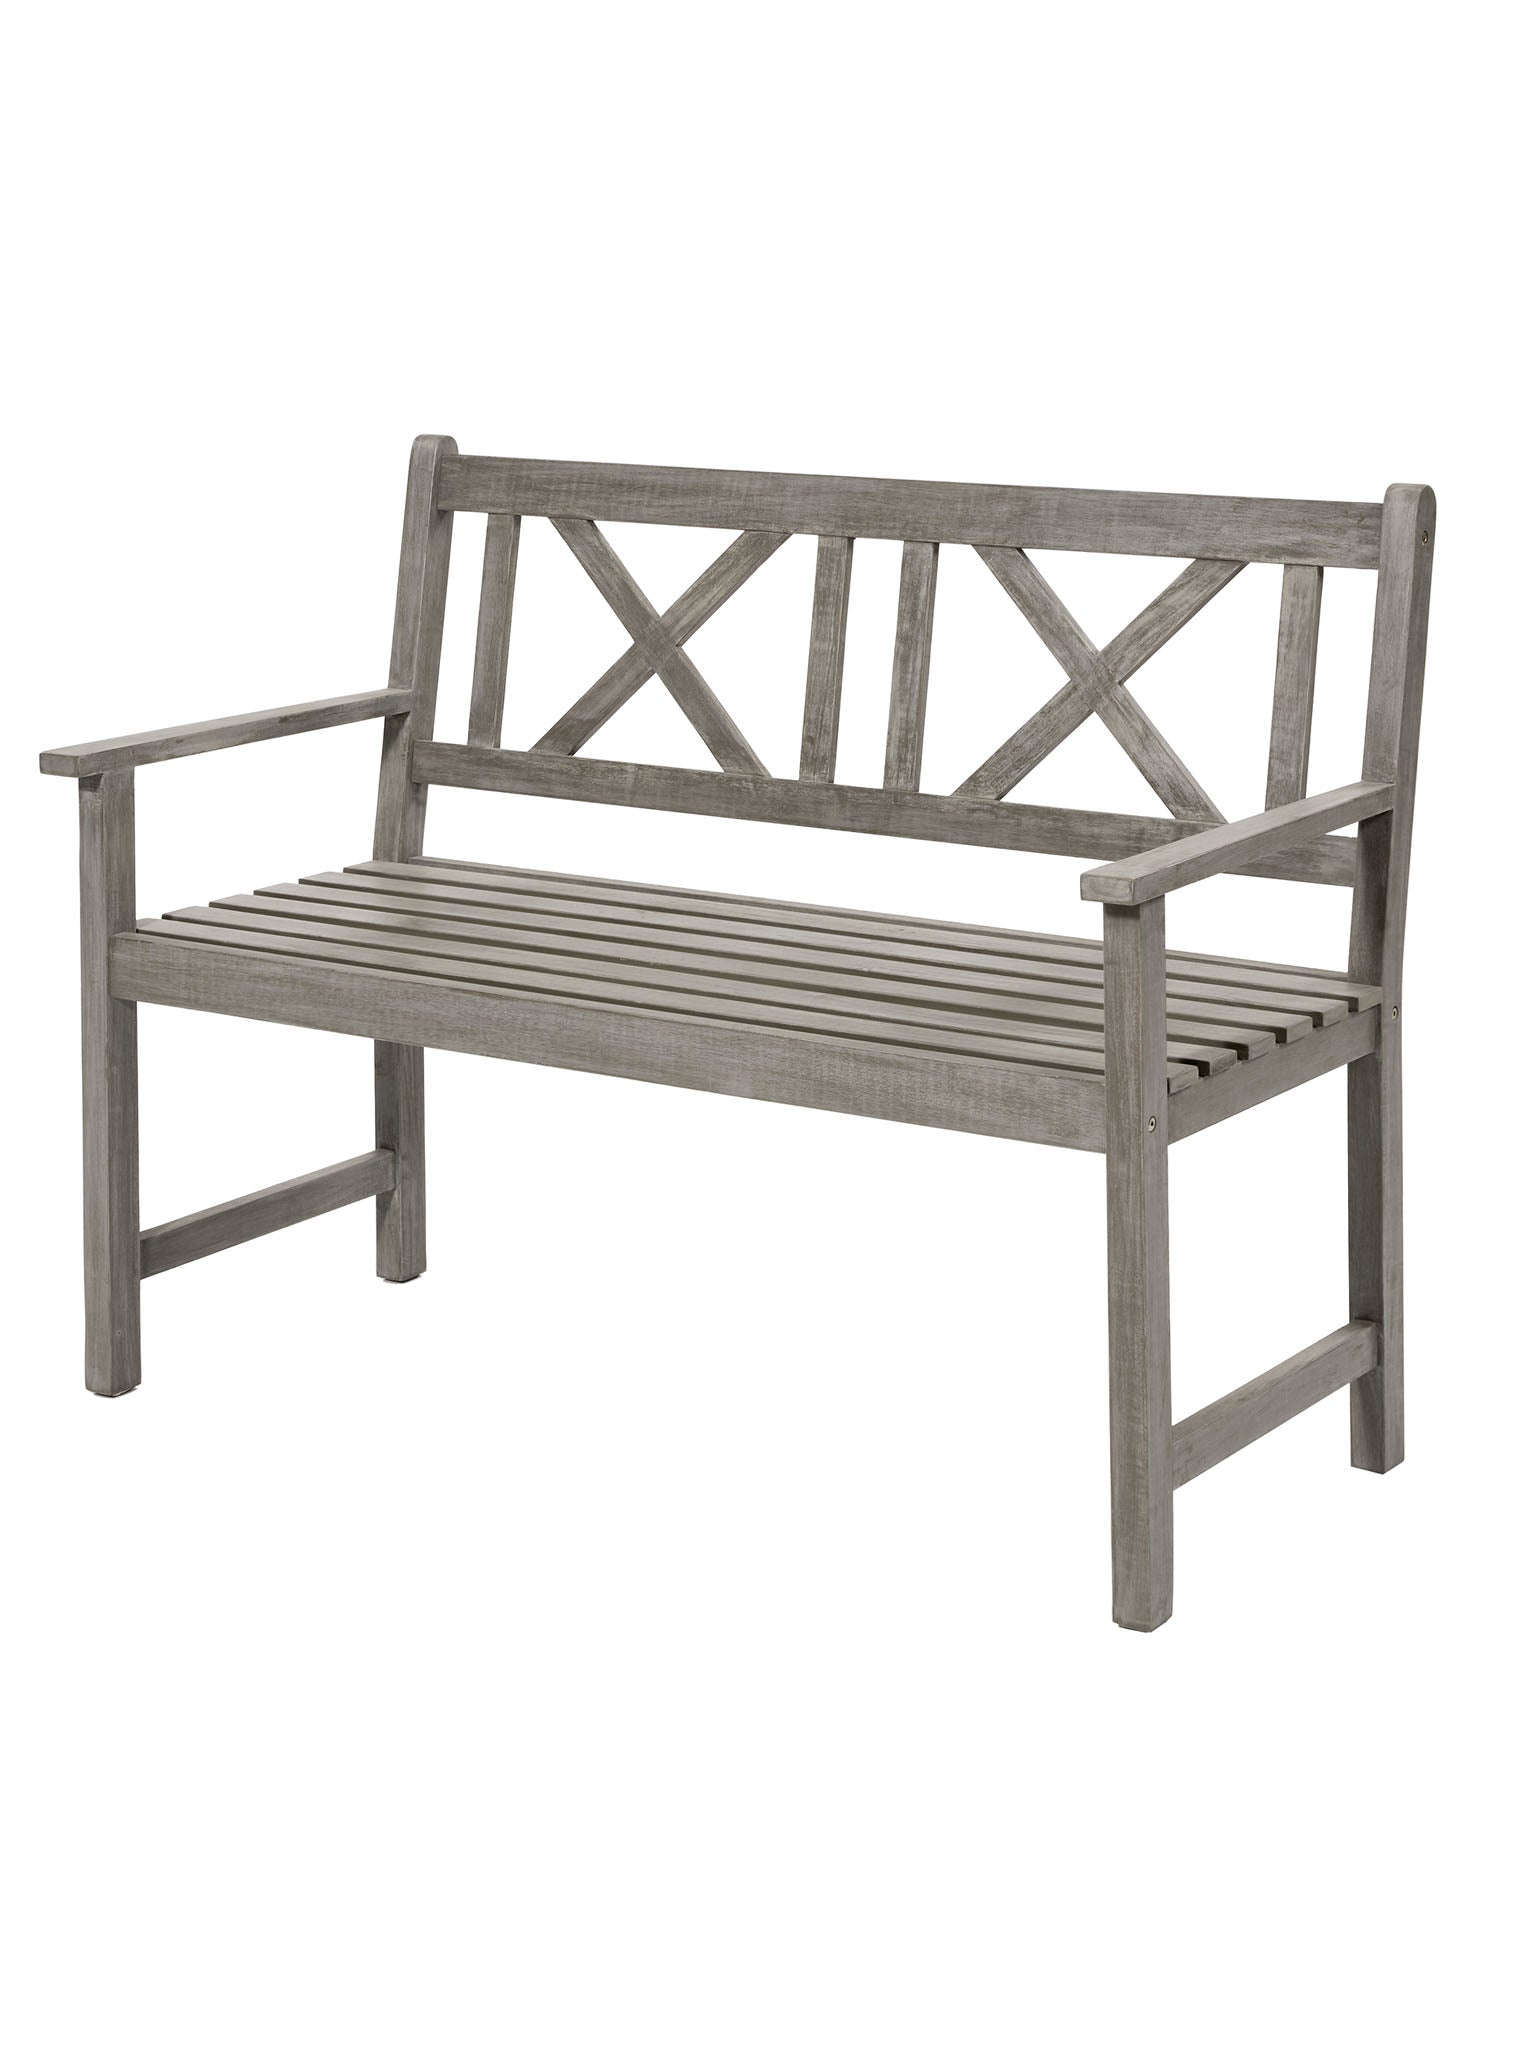 simple but classic Acacia wooden bench, is strong, durable, weather resistant and easy to maintain and assemble. 